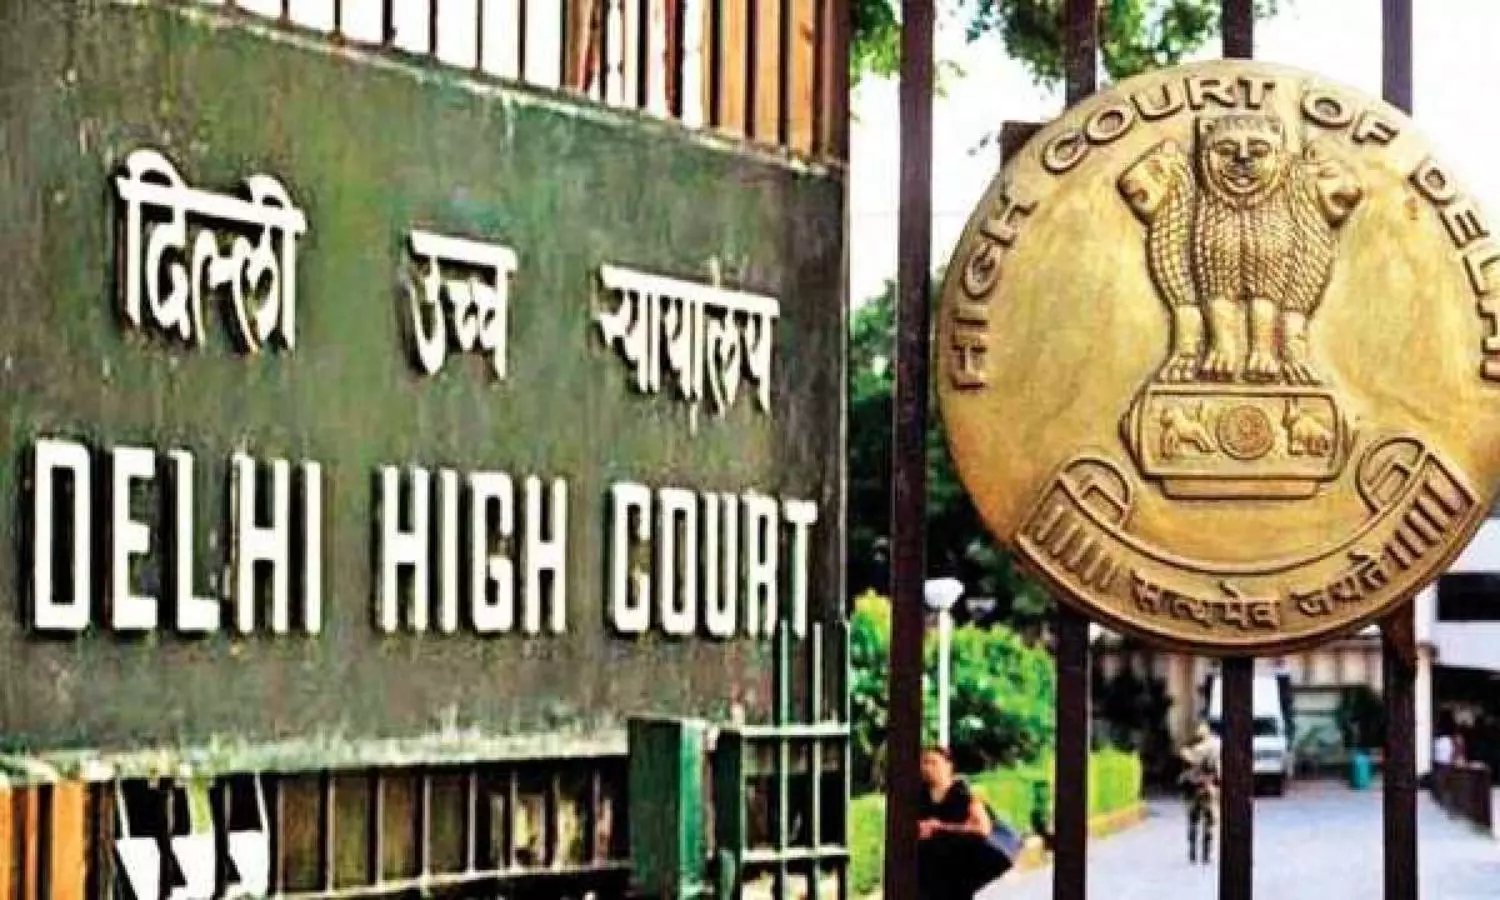 CHS Officers cannot be promoted only on basis of years of service without considering Recruitment Rules, provisions governing promotions: Delhi HC